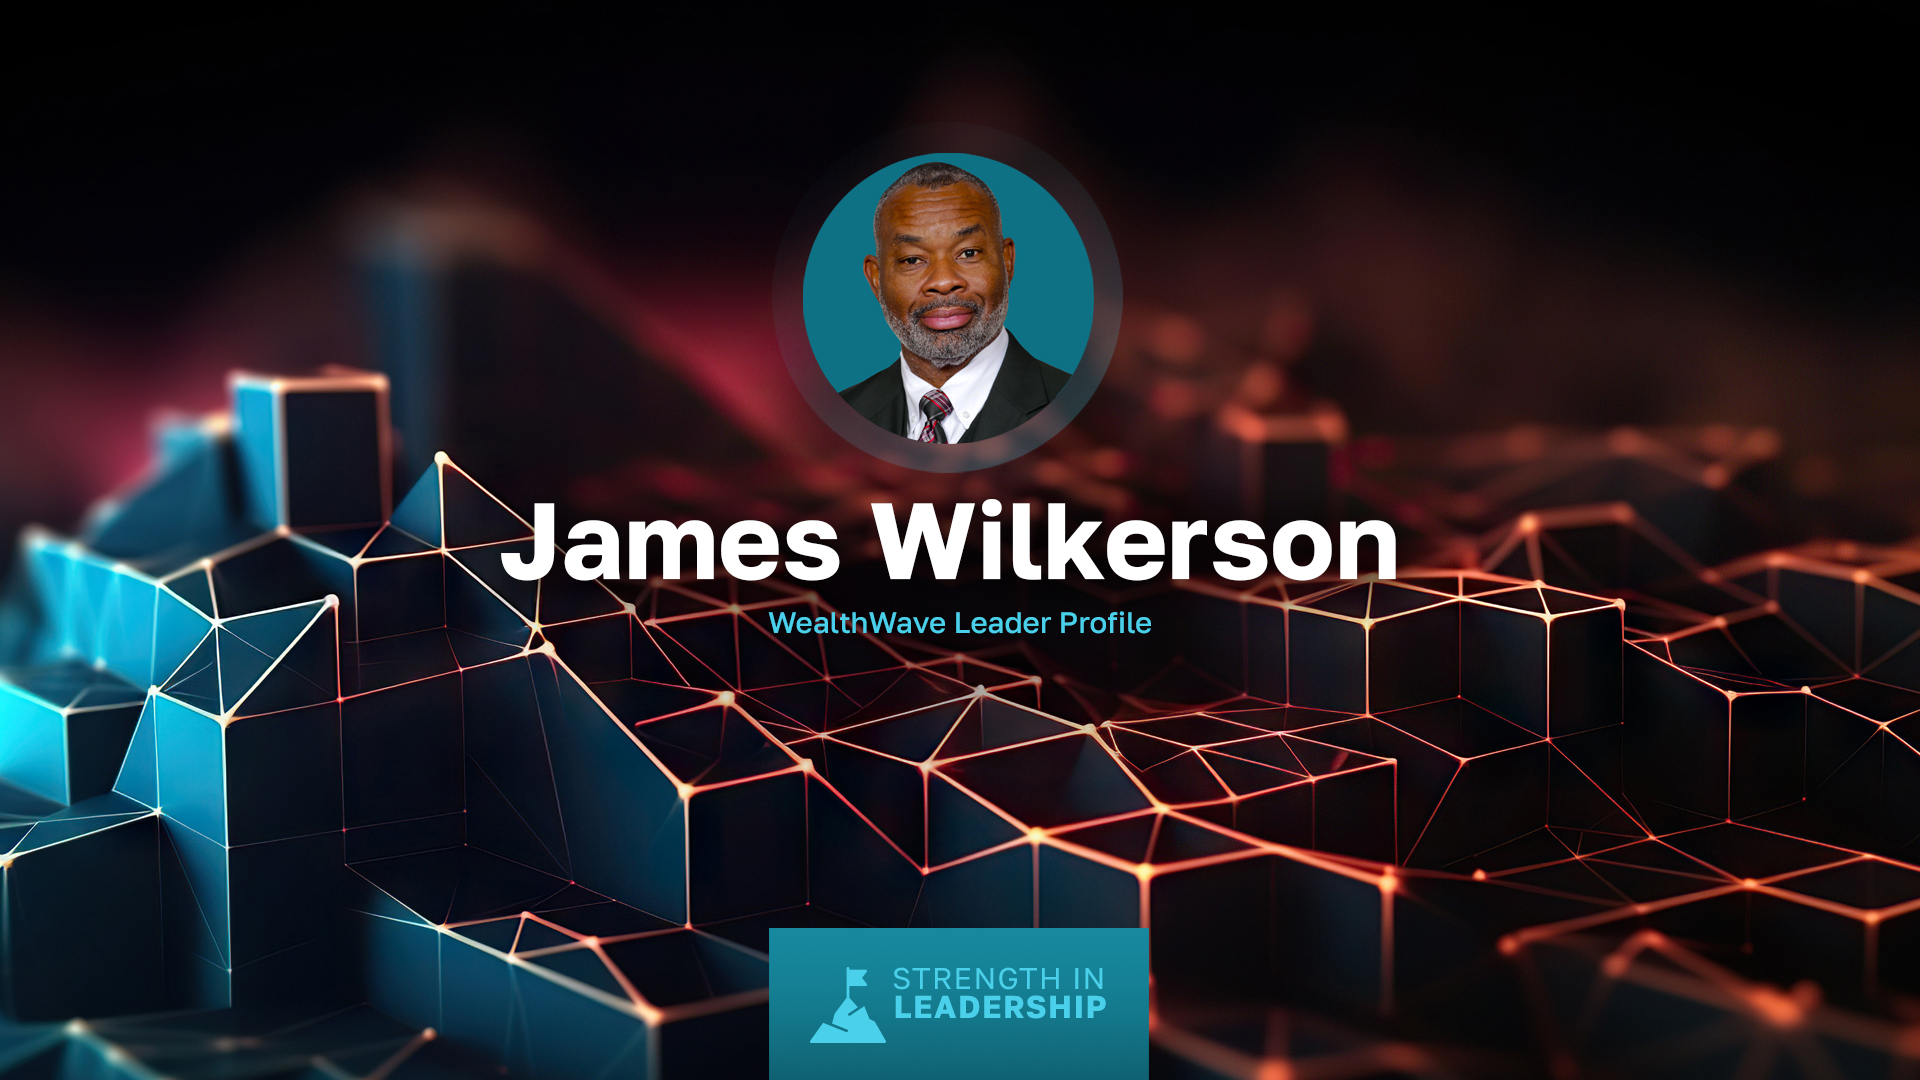 Leader Profile: James Wilkerson— From Naval Officer to Financial Industry Leader